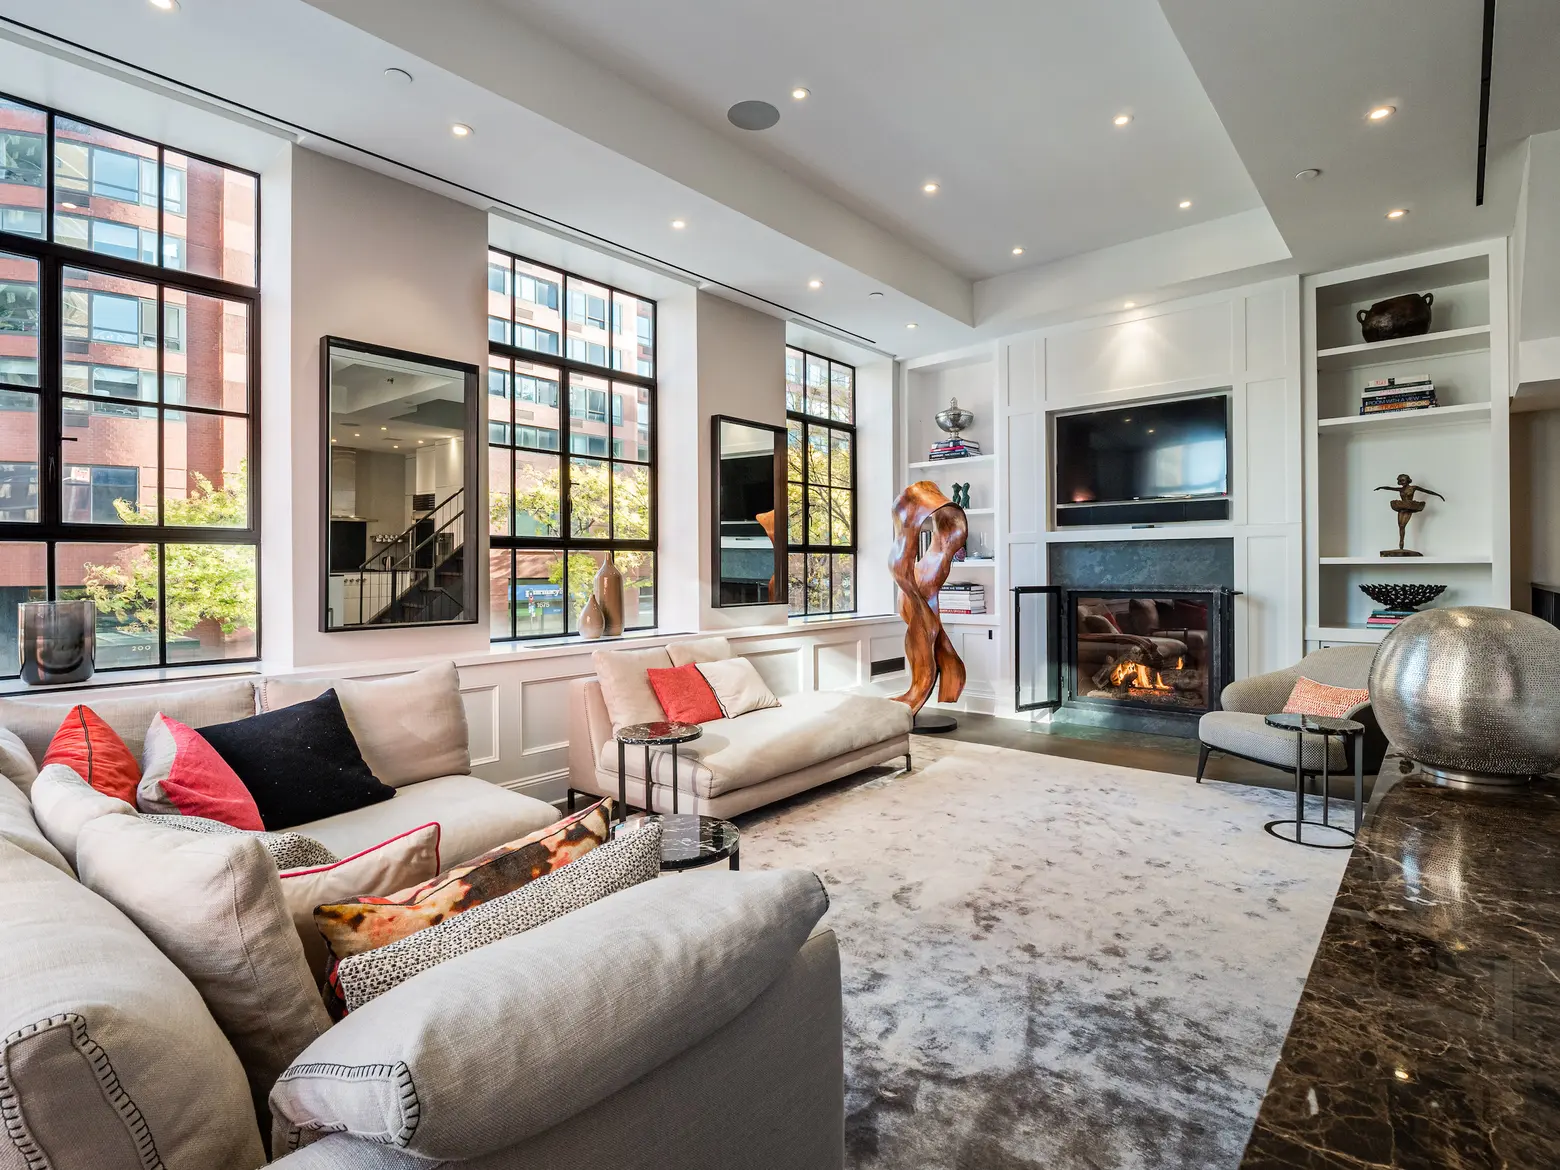 For $10M, an Upper East Side townhouse with downtown loft style